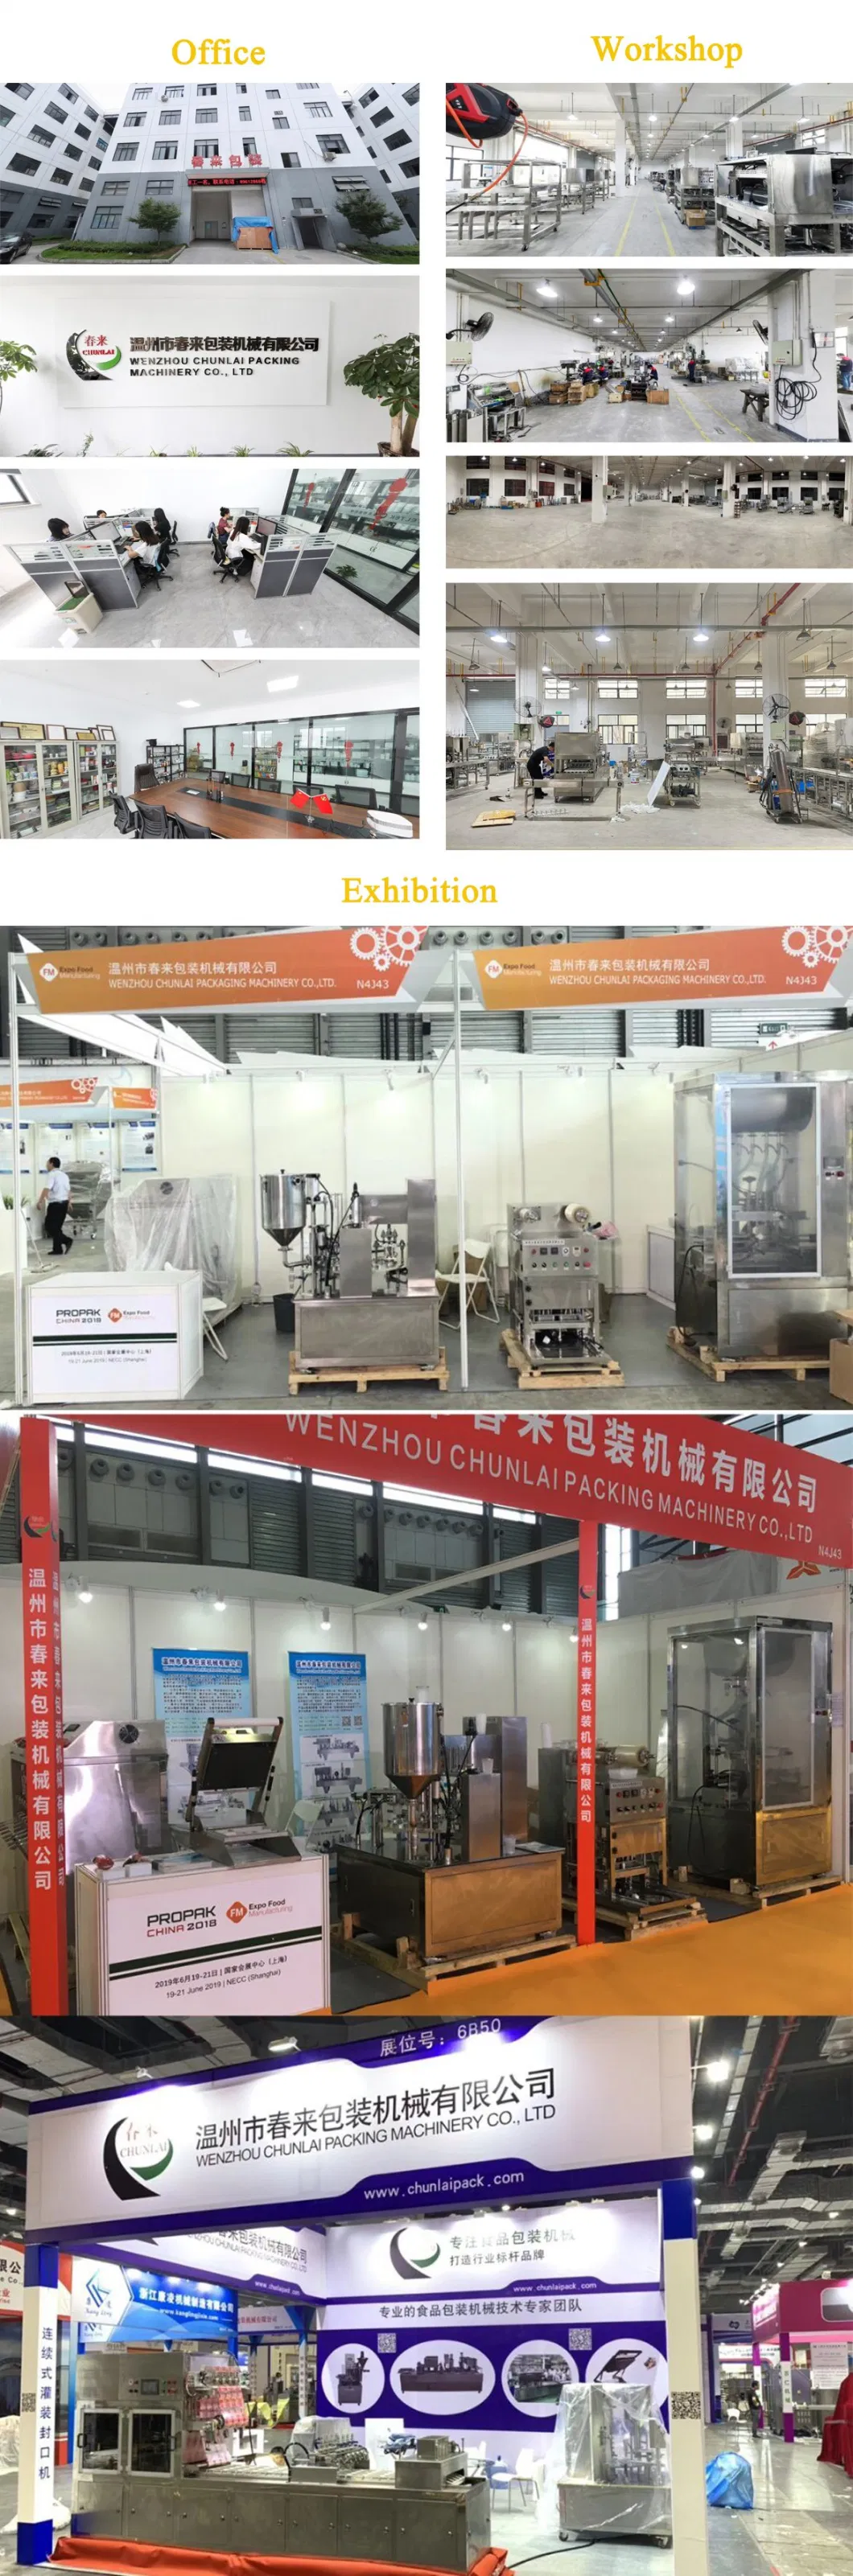 Vacuum, Gas Map Modified Atmosphere Packaging Semi Automatic Fruit and Meat Sealing Machine